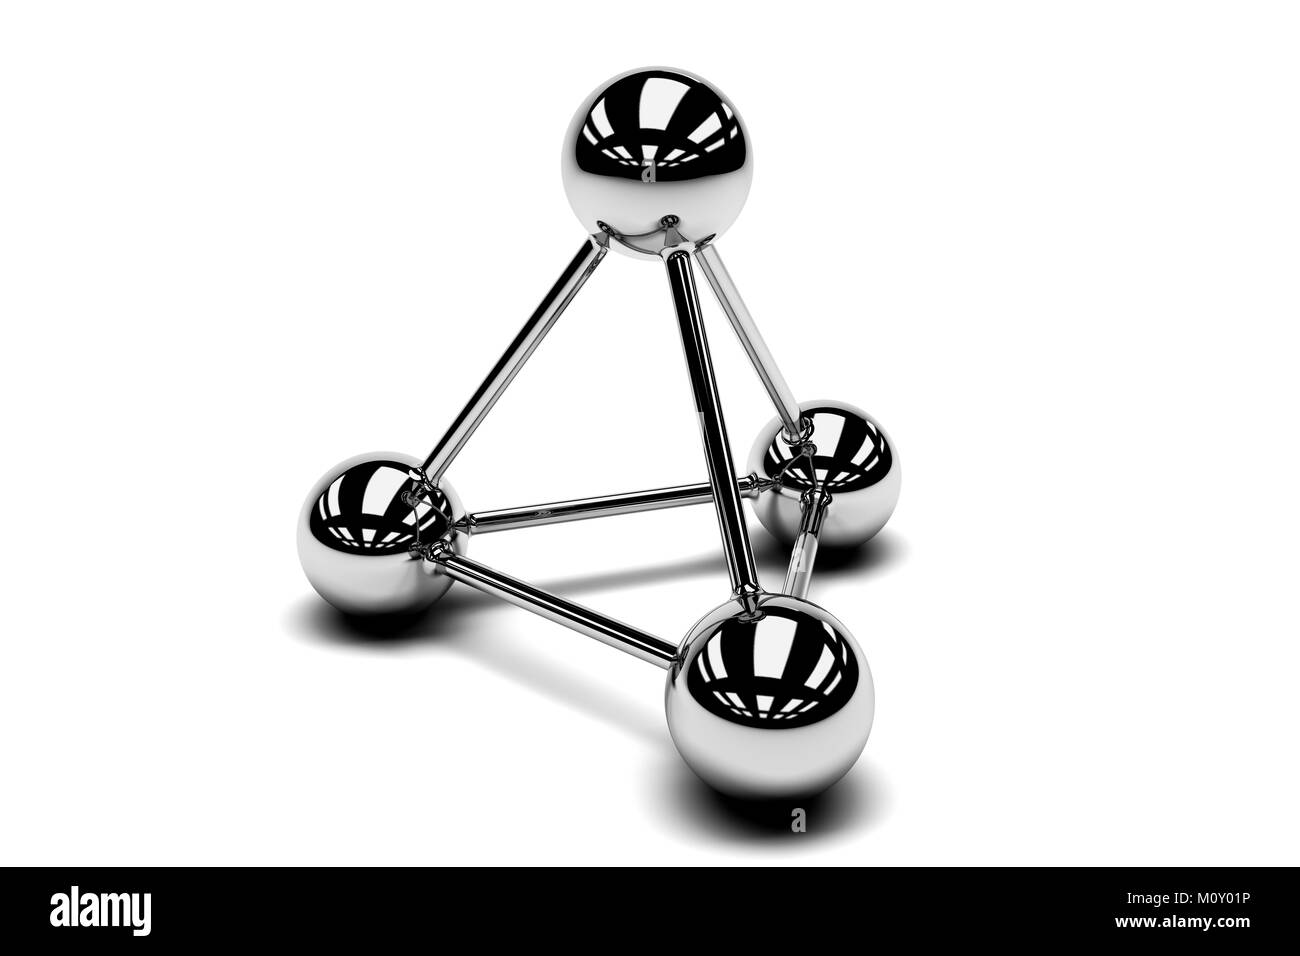 metallic balls joined together. The whole structure forms a safe, stable and balanced pyramid Stock Photo